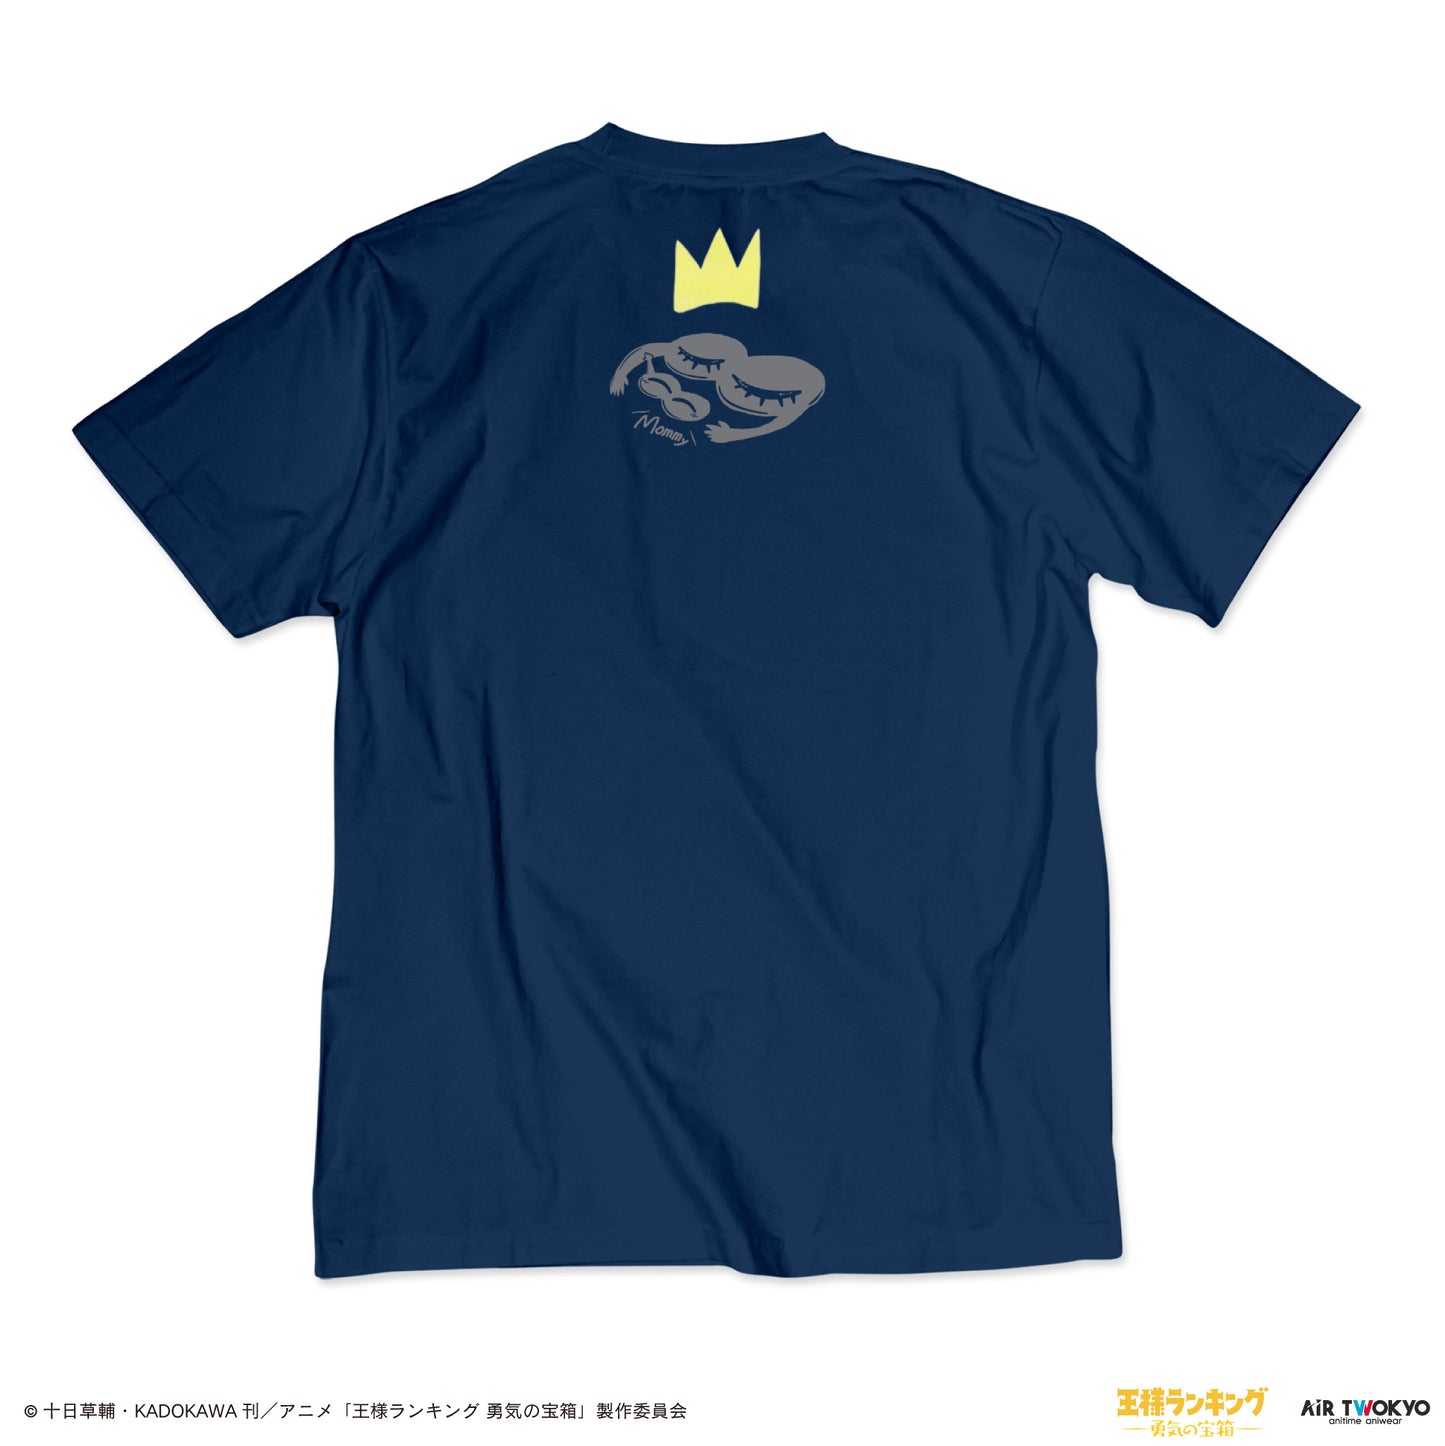 “Ranking of Kings: The Treasure Chest of Courage” scene illustration T-shirt 5